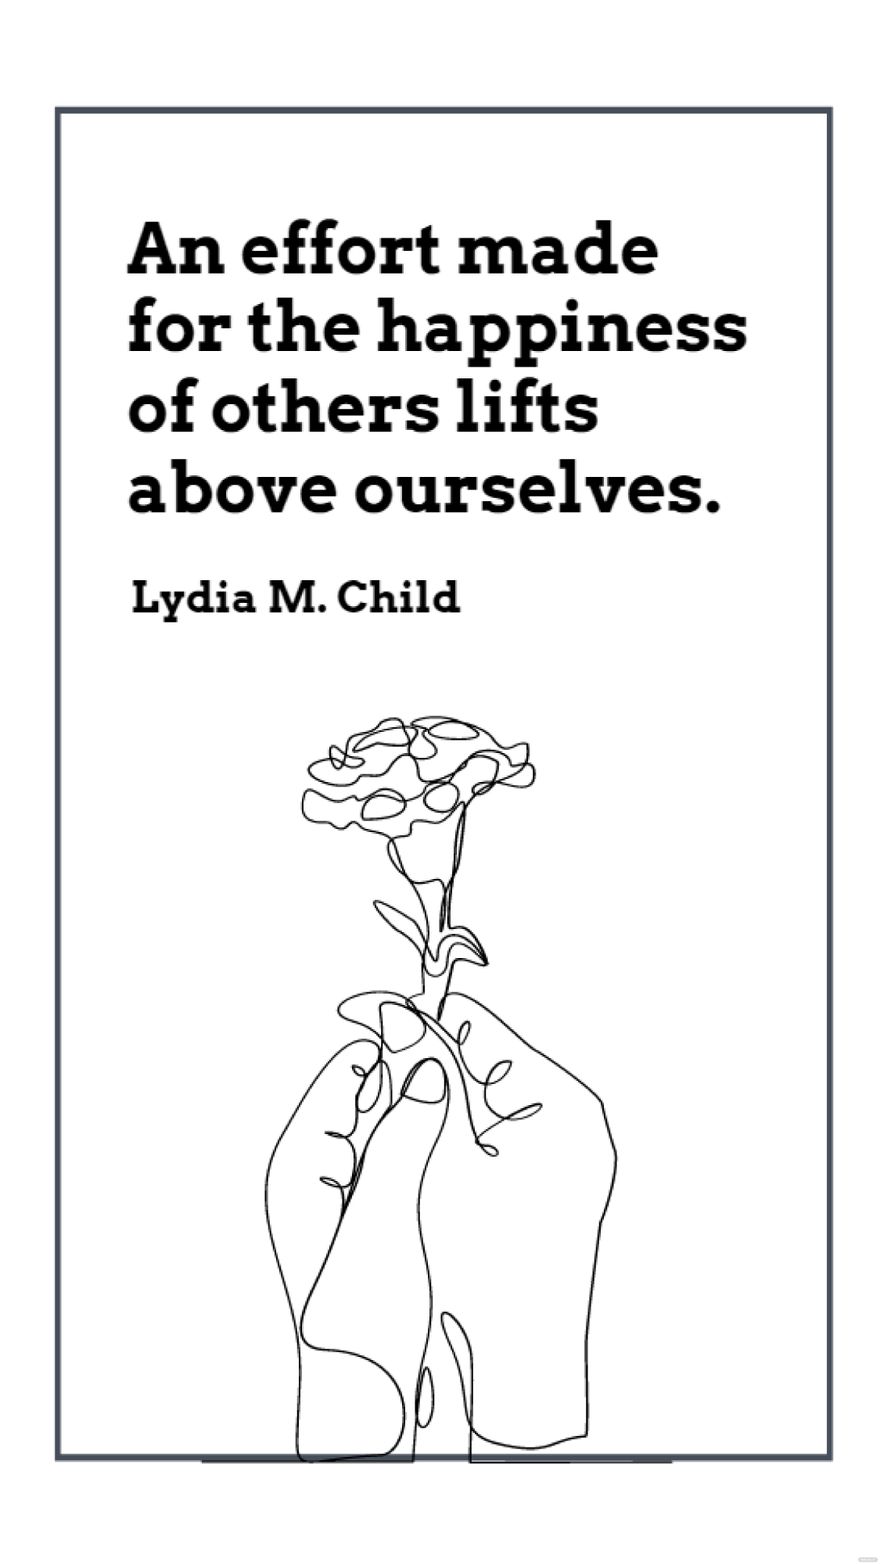 Lydia M. Child - An effort made for the happiness of others lifts above ourselves. in JPG